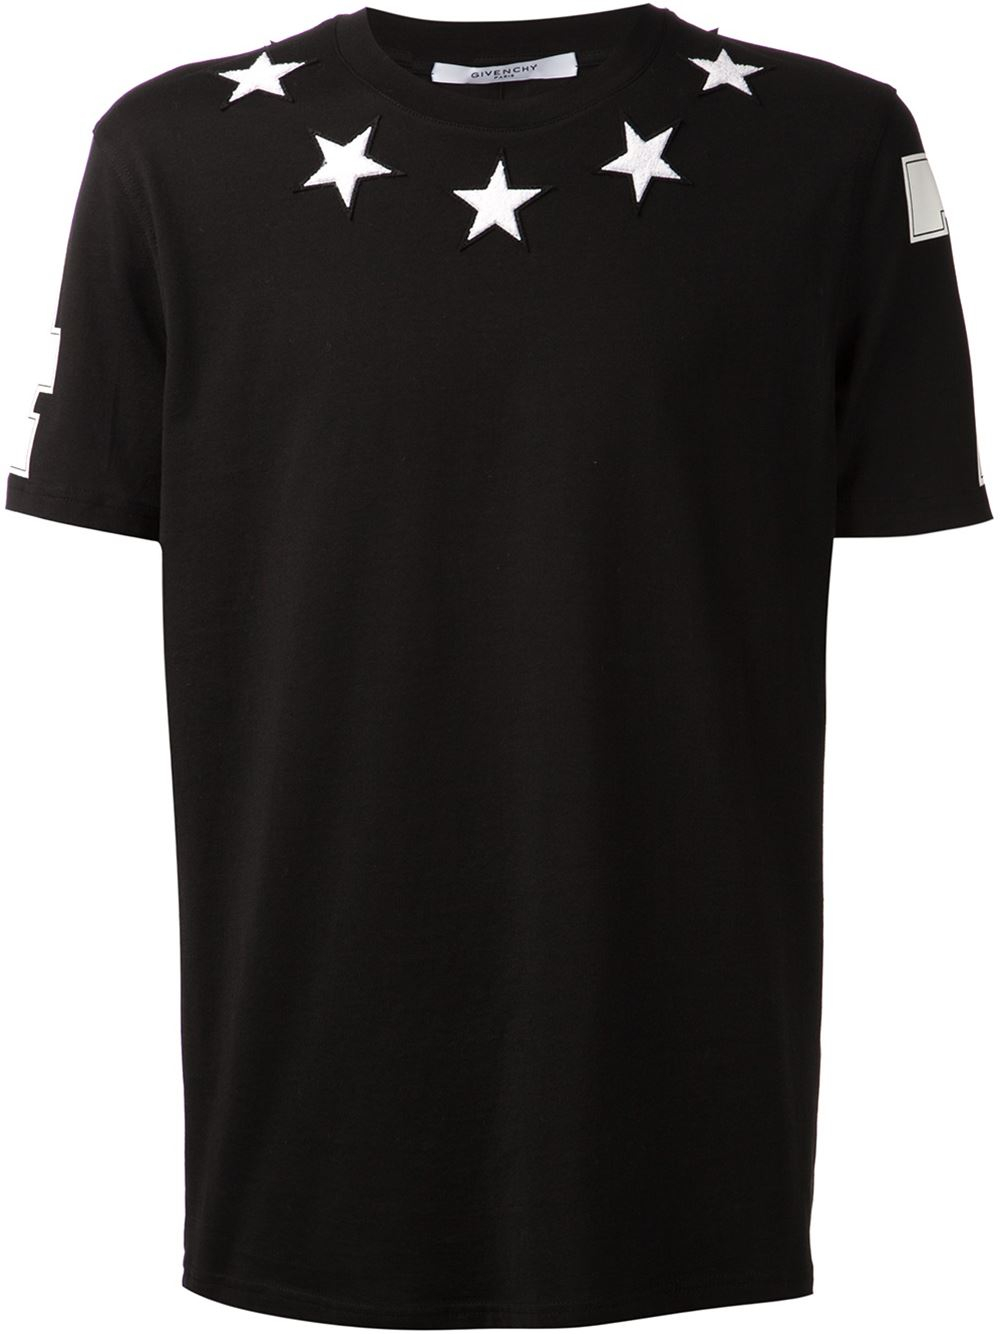 Lyst - Givenchy Terry Cloth Star T-Shirt in Black for Men